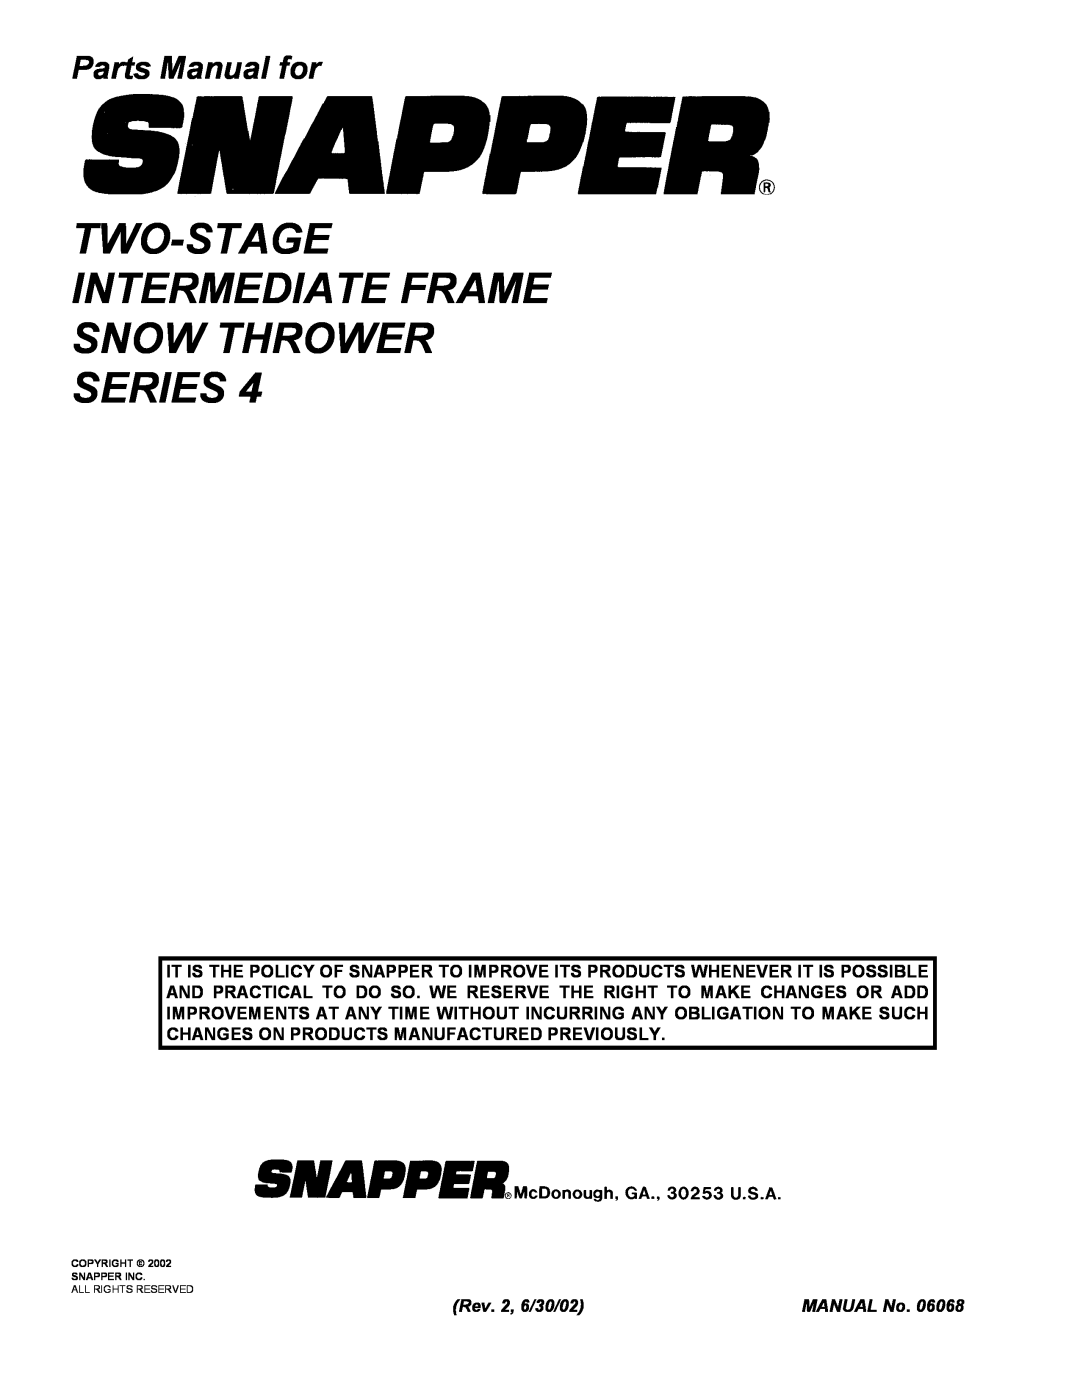 Snapper EI7244, EI55224 Two-Stage Intermediate Frame Snow Thrower Series, Parts Manual for, Rev. 2, 6/30/02, MANUAL No 